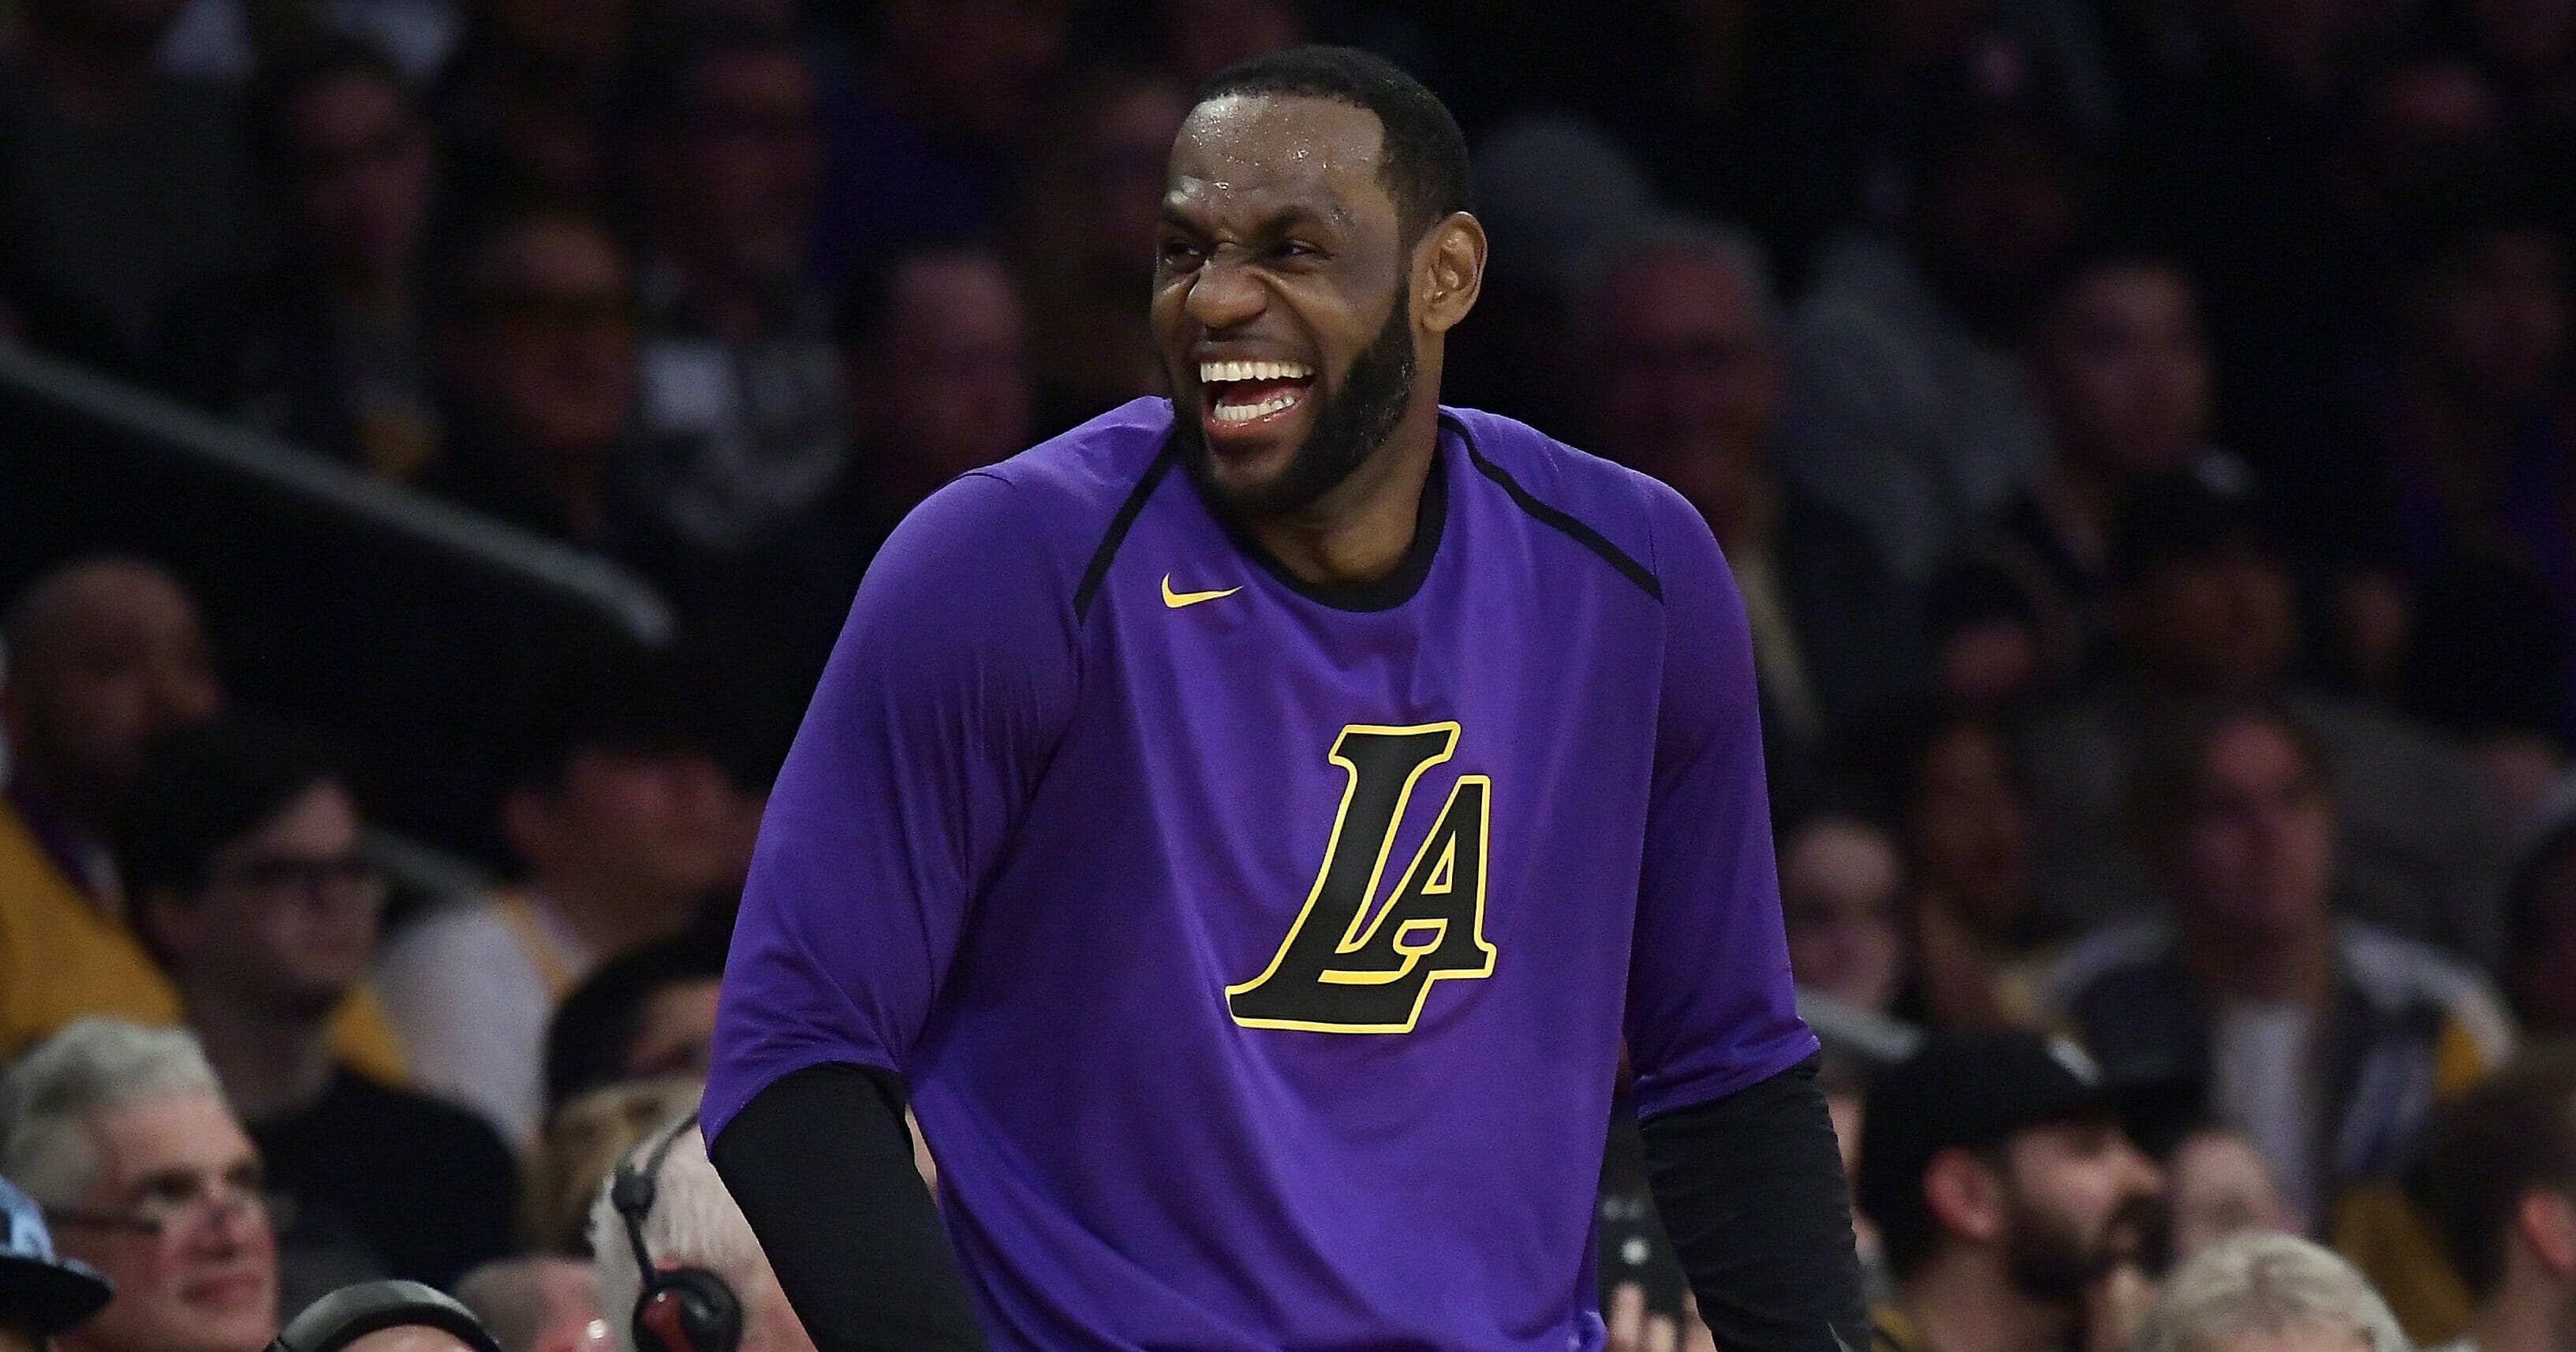 Los Angeles Lakers forward LeBron James laughs as he waits to check in to the team's NBA basketball game against the Charlotte Hornets during the second half Friday, March 29, 2019, in Los Angeles.